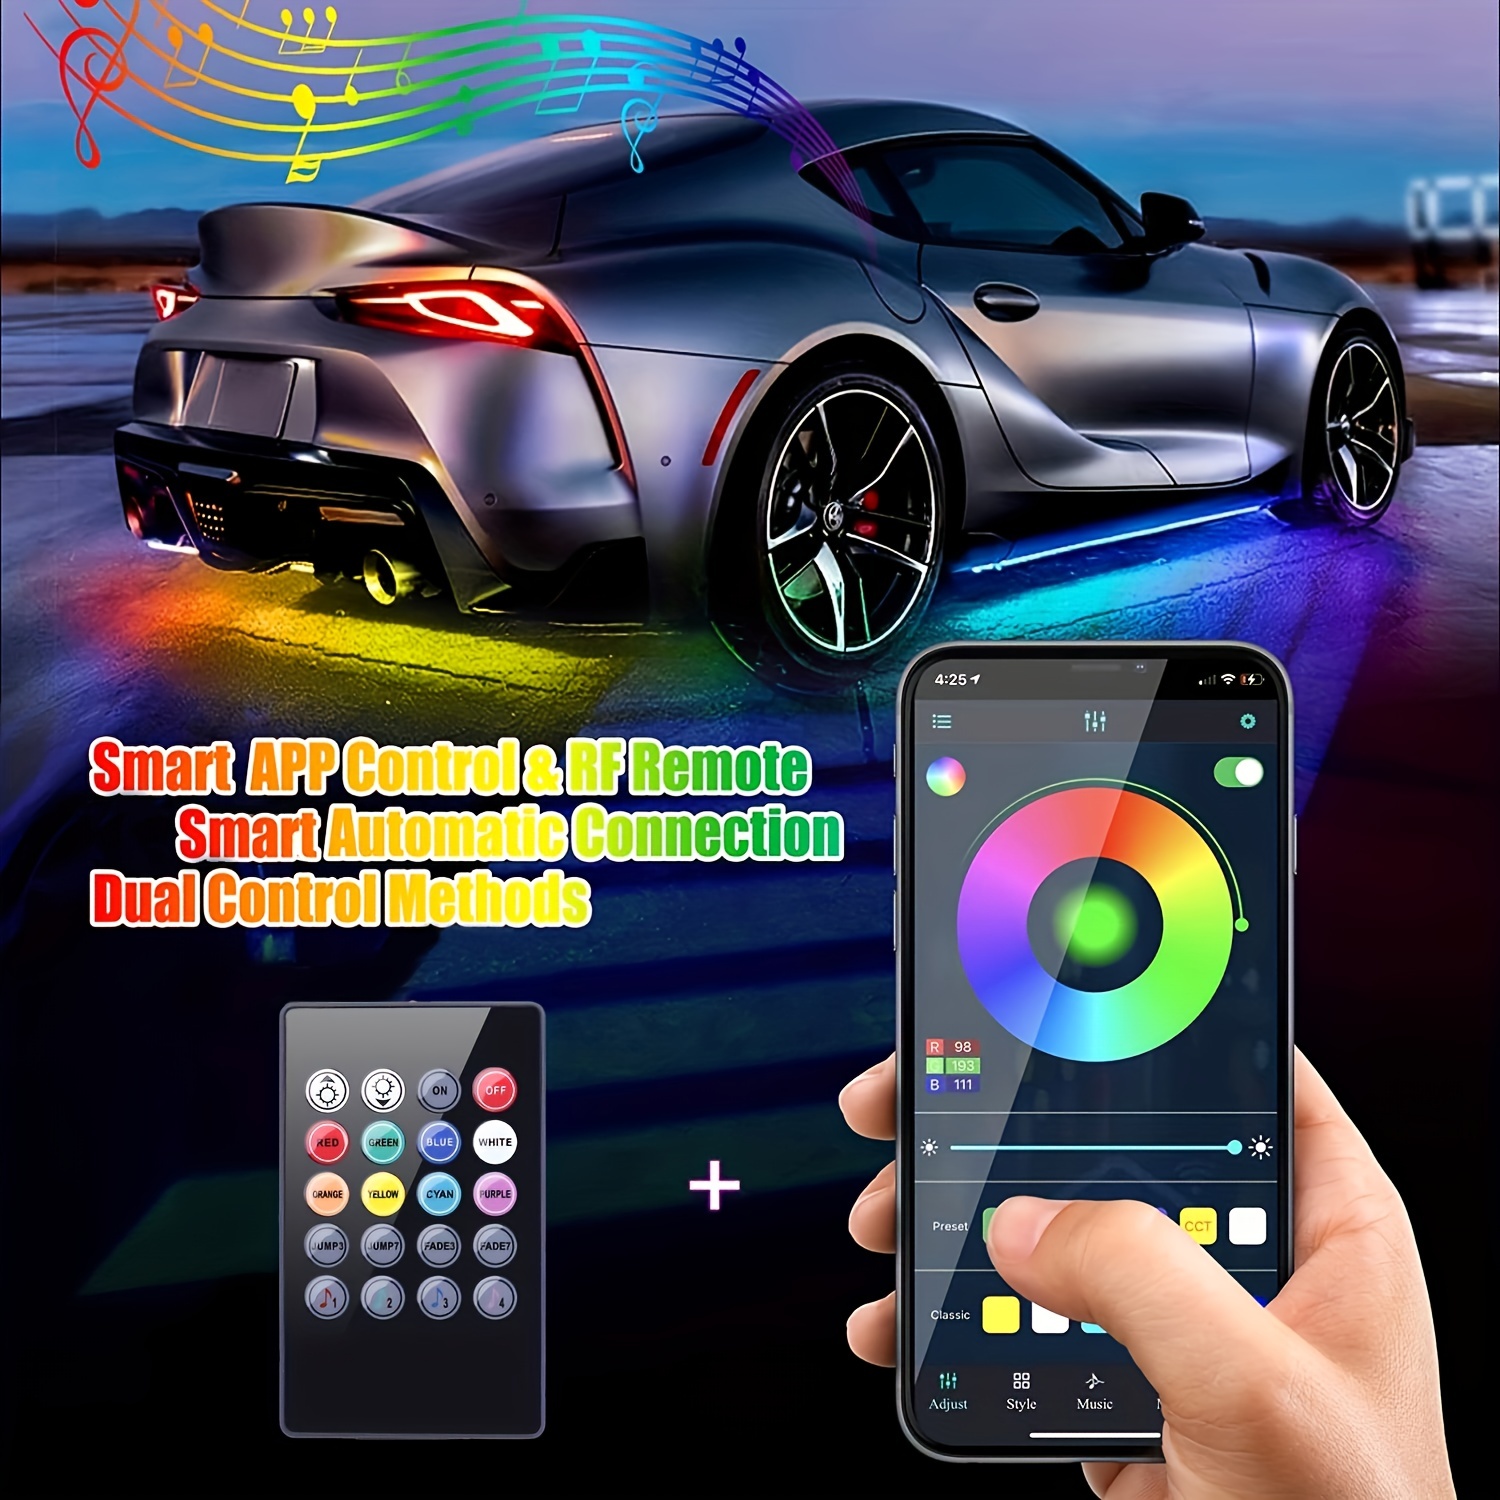 Underglow Kit for Car, Car Led Underglow Lights for Trucks with App and  Remote Control, 16 Million Dream Colors Chasing, 213 Scene Modes, Music DIY